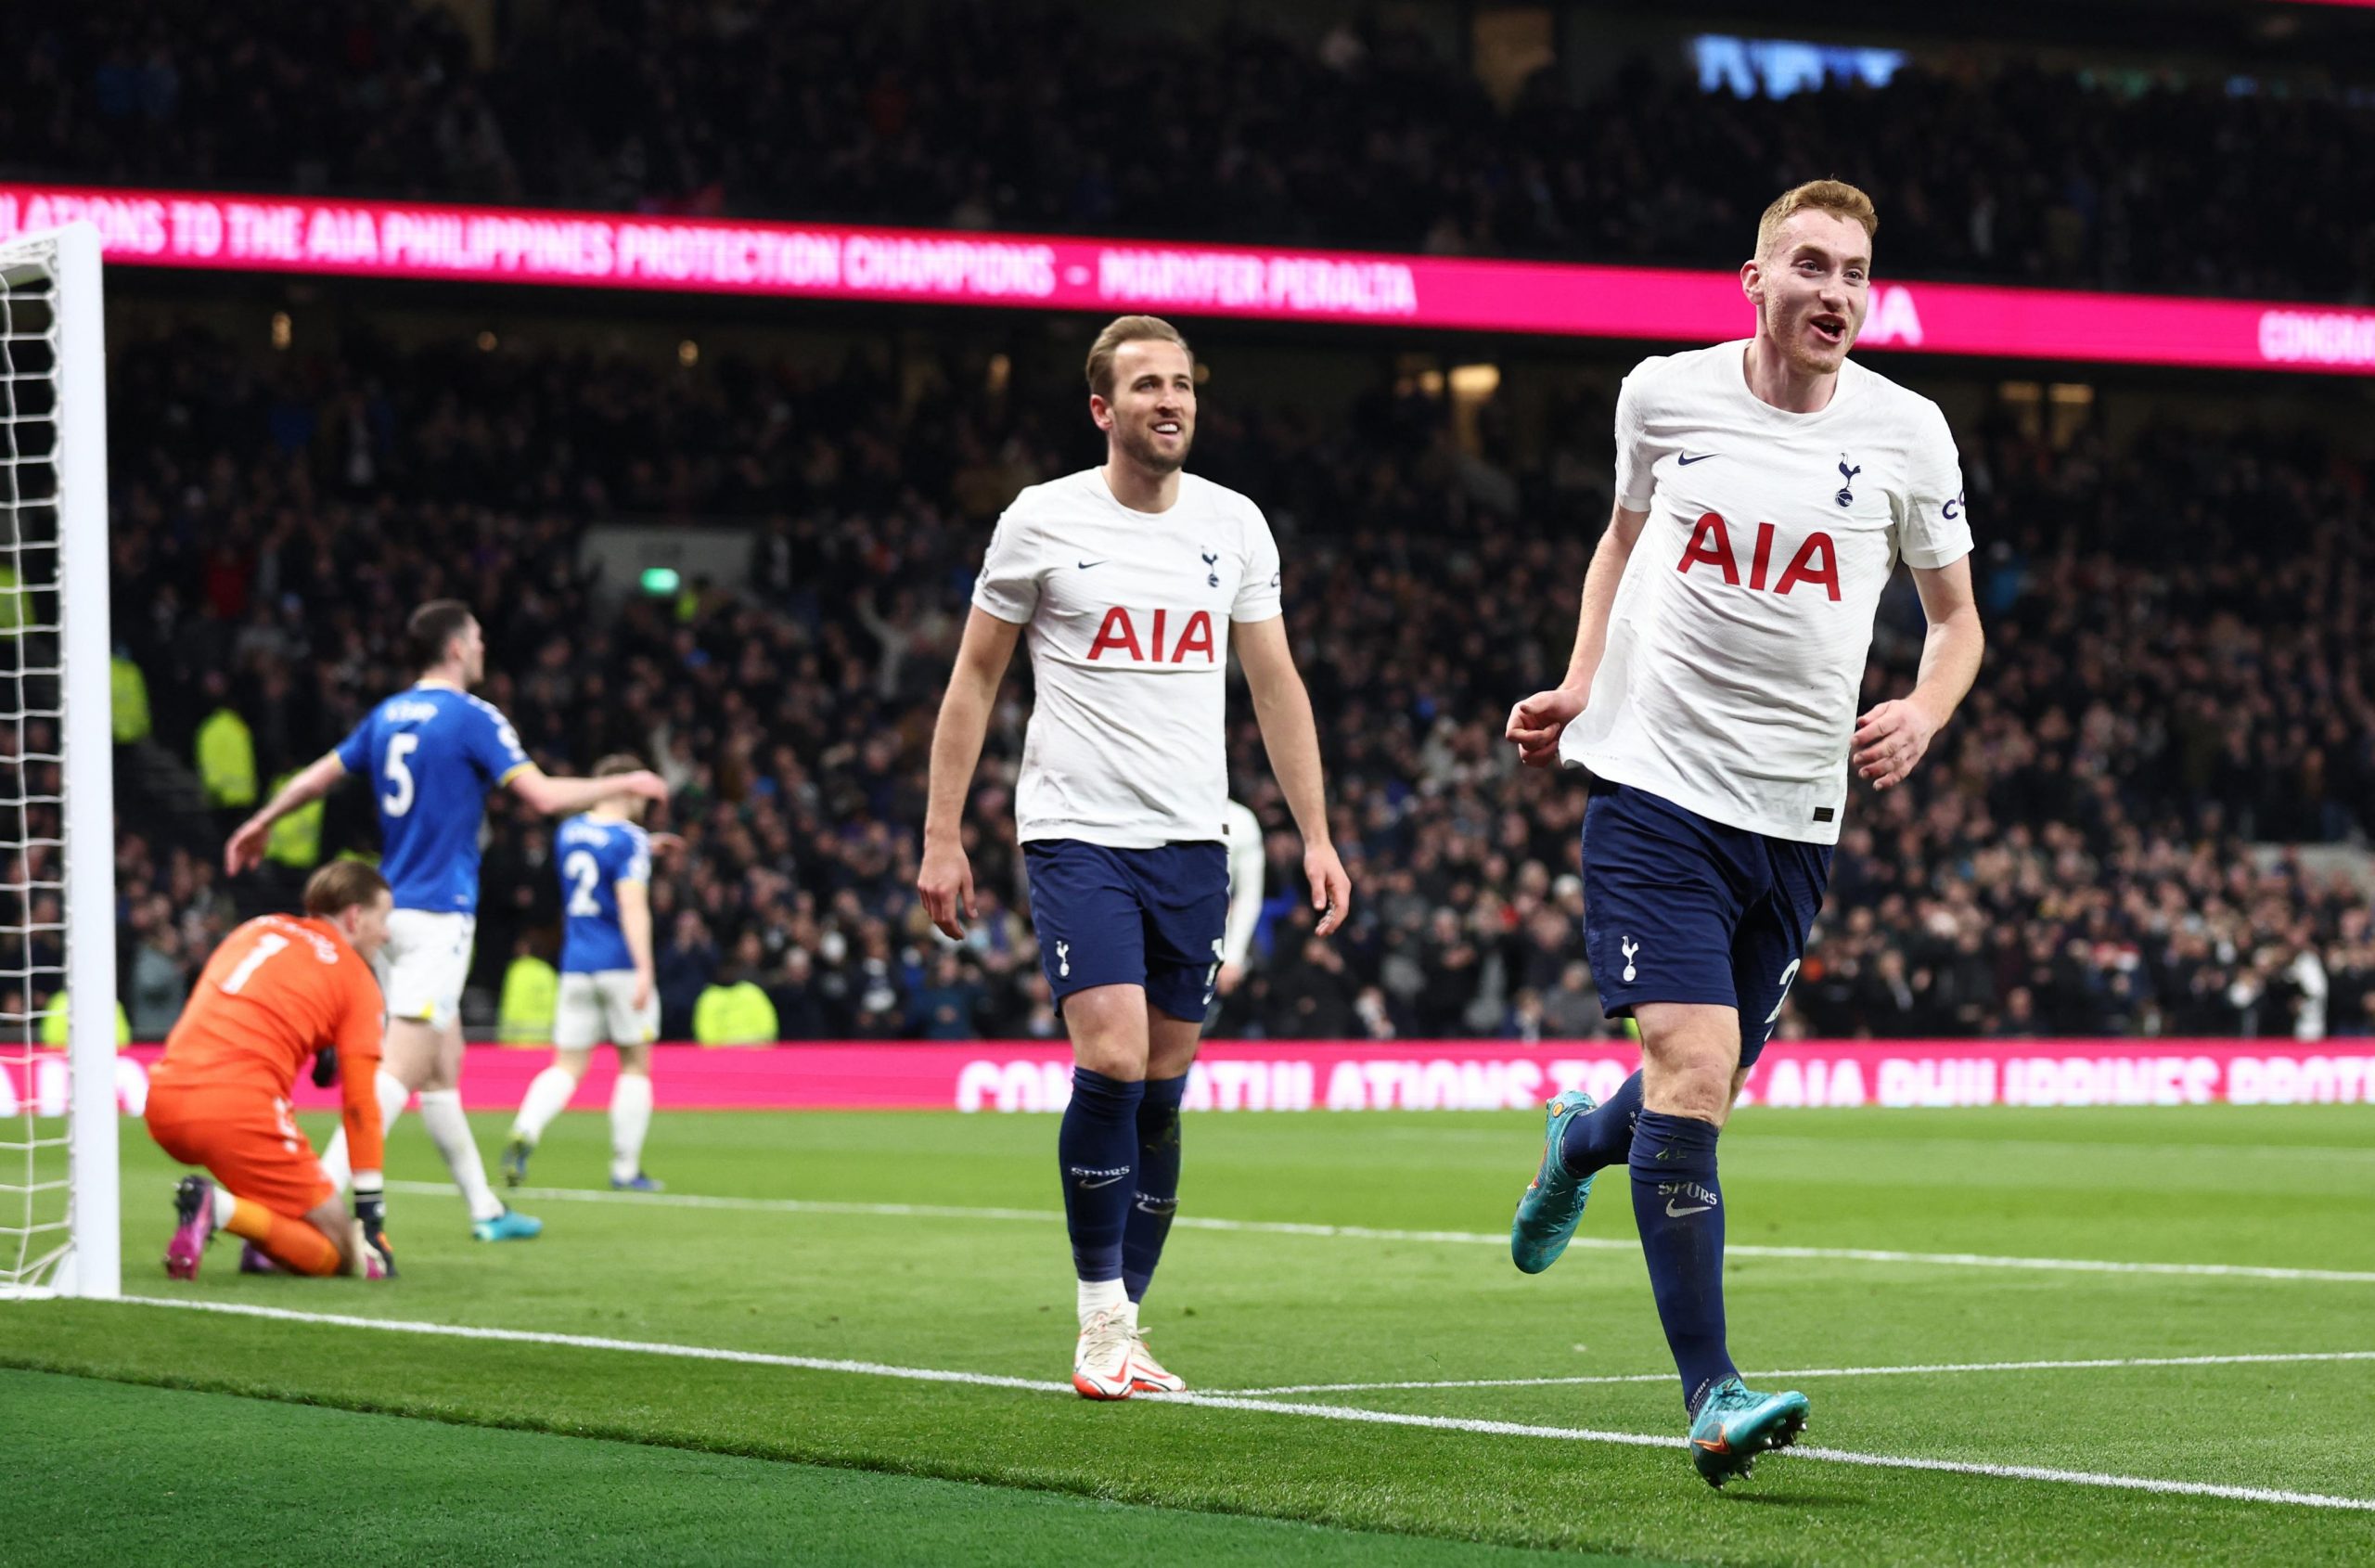 PL: 5-star Spurs run riot against struggling Everton to boost top 4 hopes